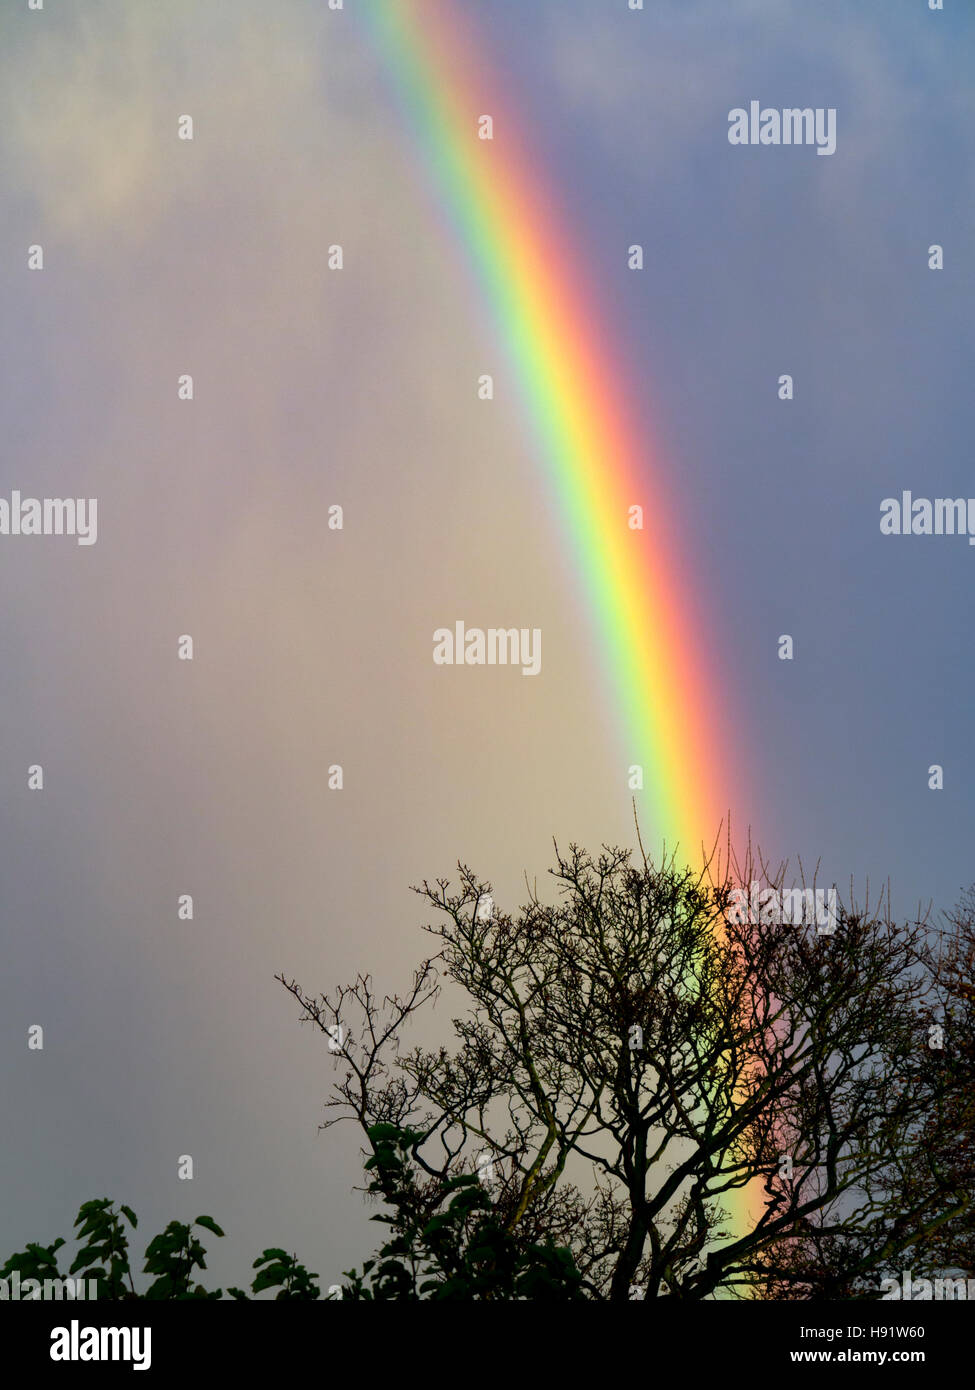 A vivid section of a rainbow behind a leafless tree top with stormy sky Stock Photo